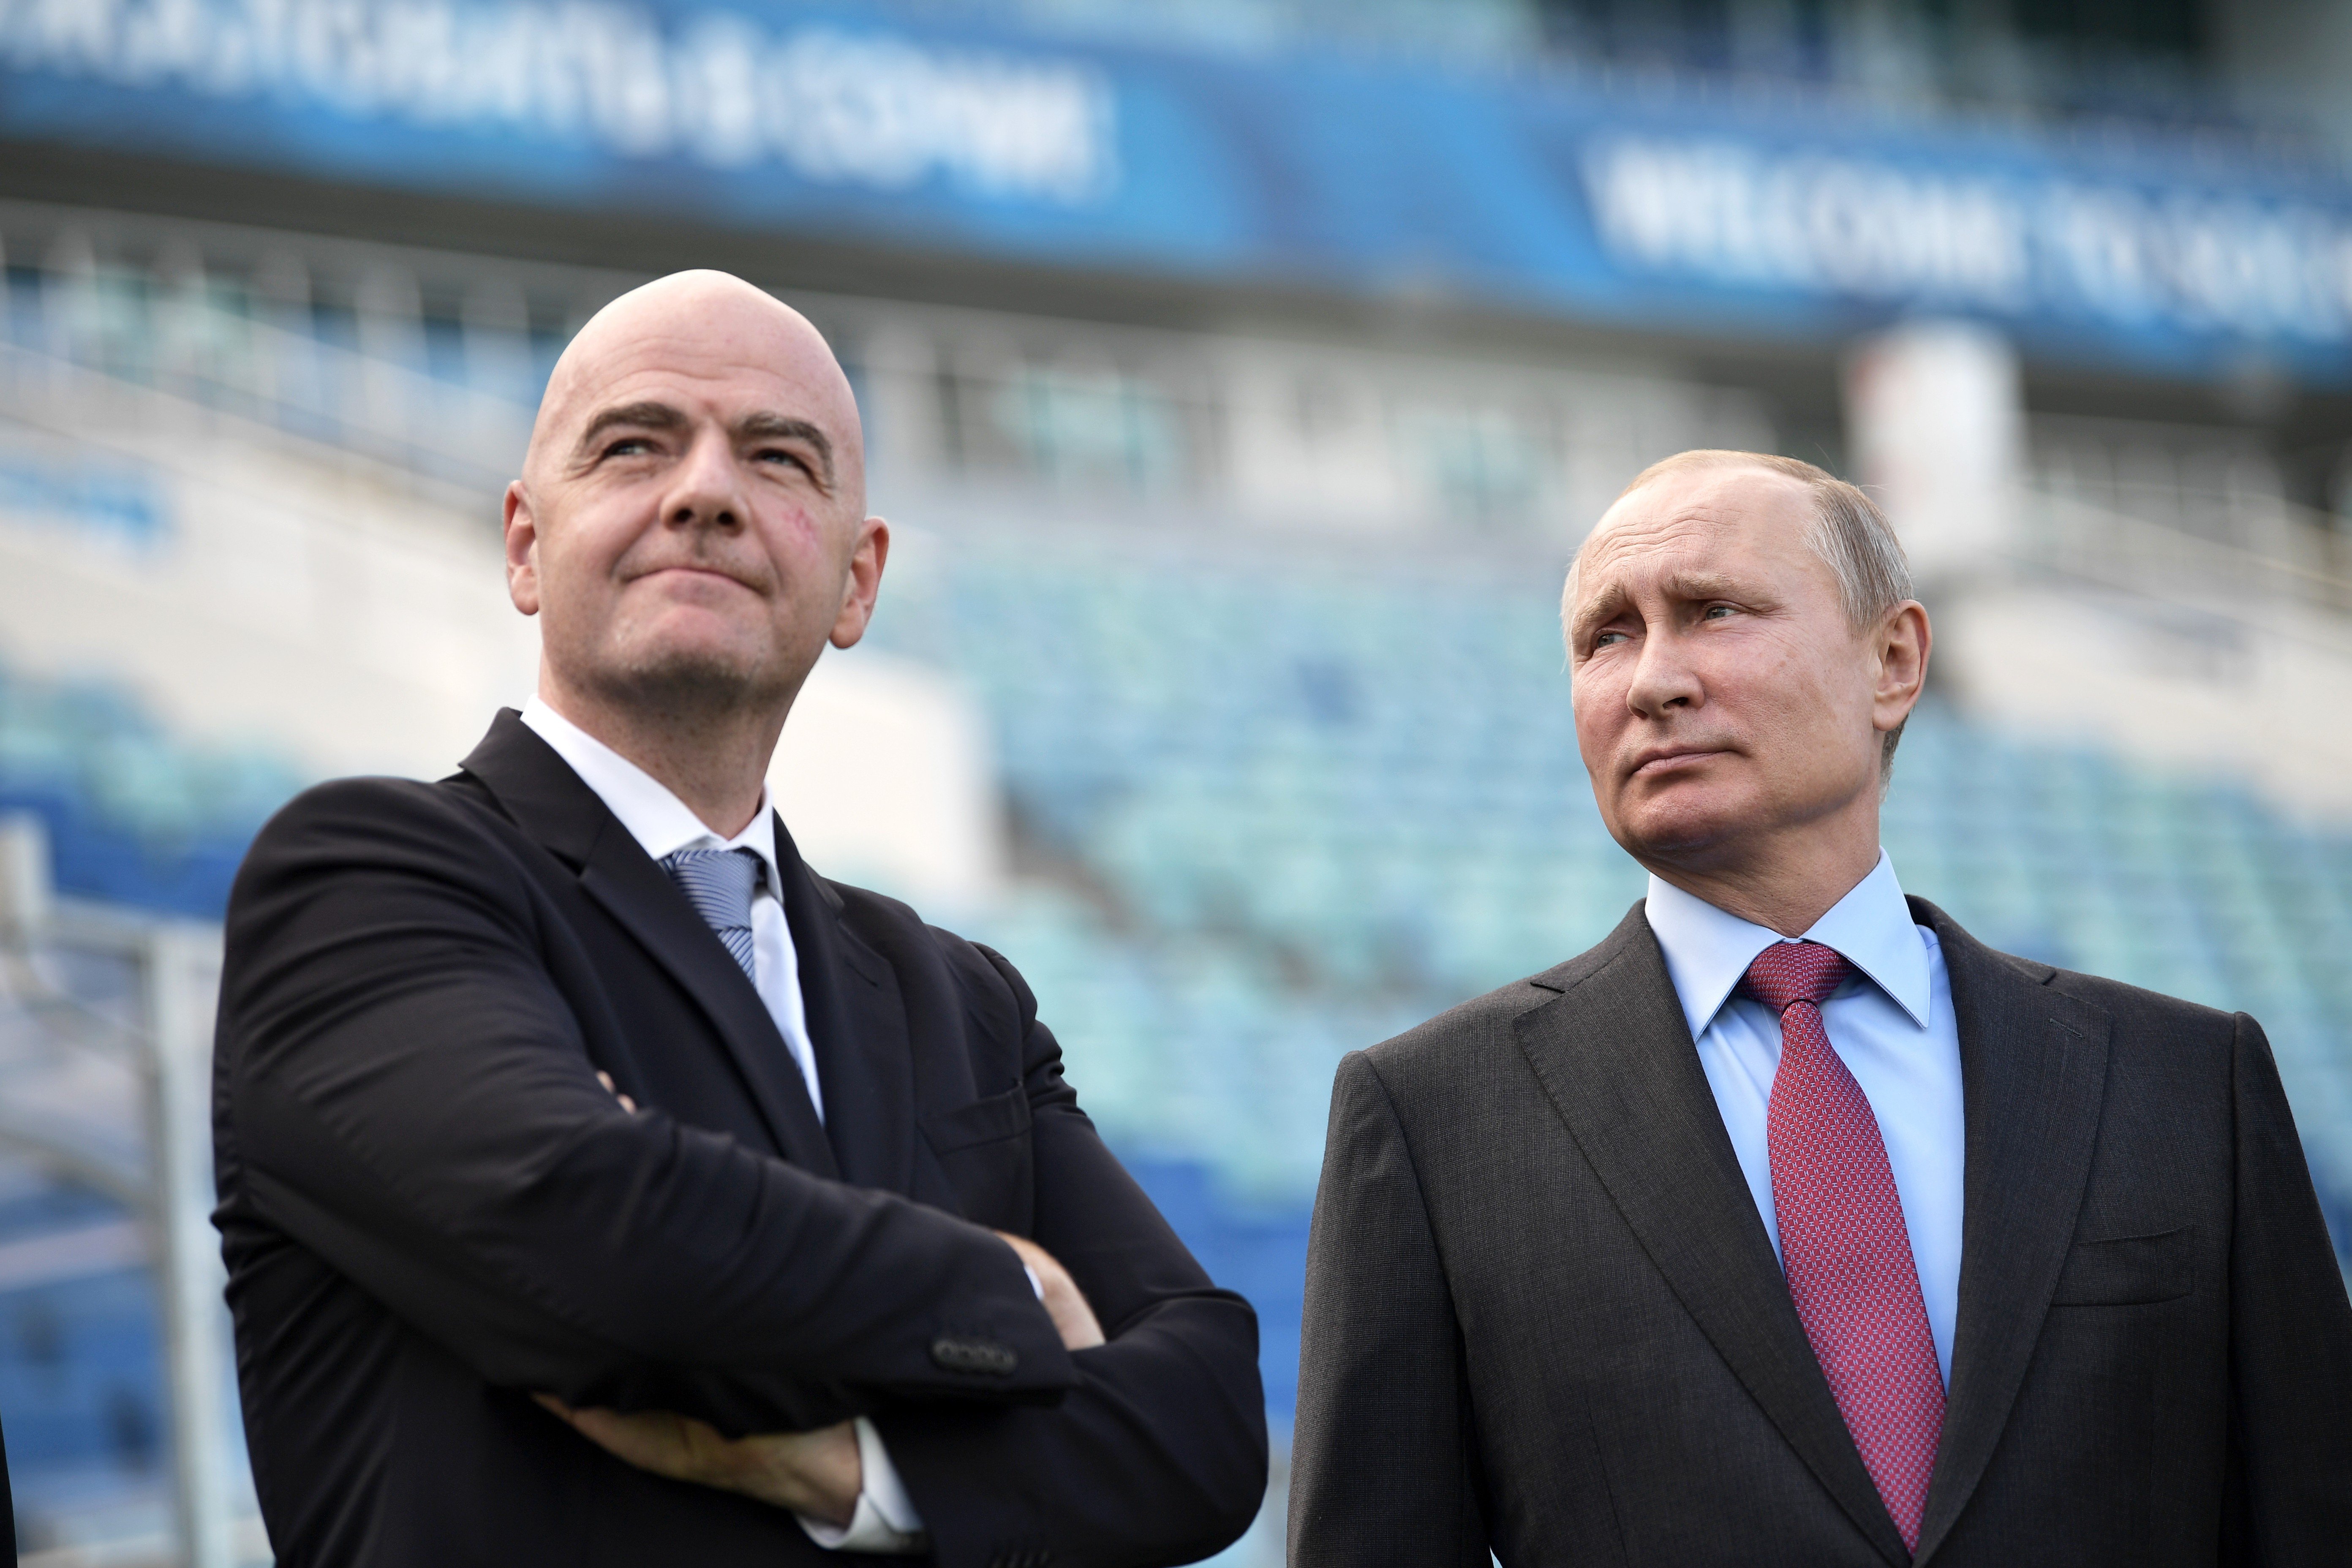 Fifa president Gianni Infantino (left) and Russian President Vladimir Putin inspect the renovated Fisht Stadium, in Sochi, which will host some matches of the upcoming 2018 Fifa World Cup in Russia, on May 3. Infantino has spoken of grandiose plans for world football, including a new world cup for clubs rather than countries. Photo: EPA-EFE 